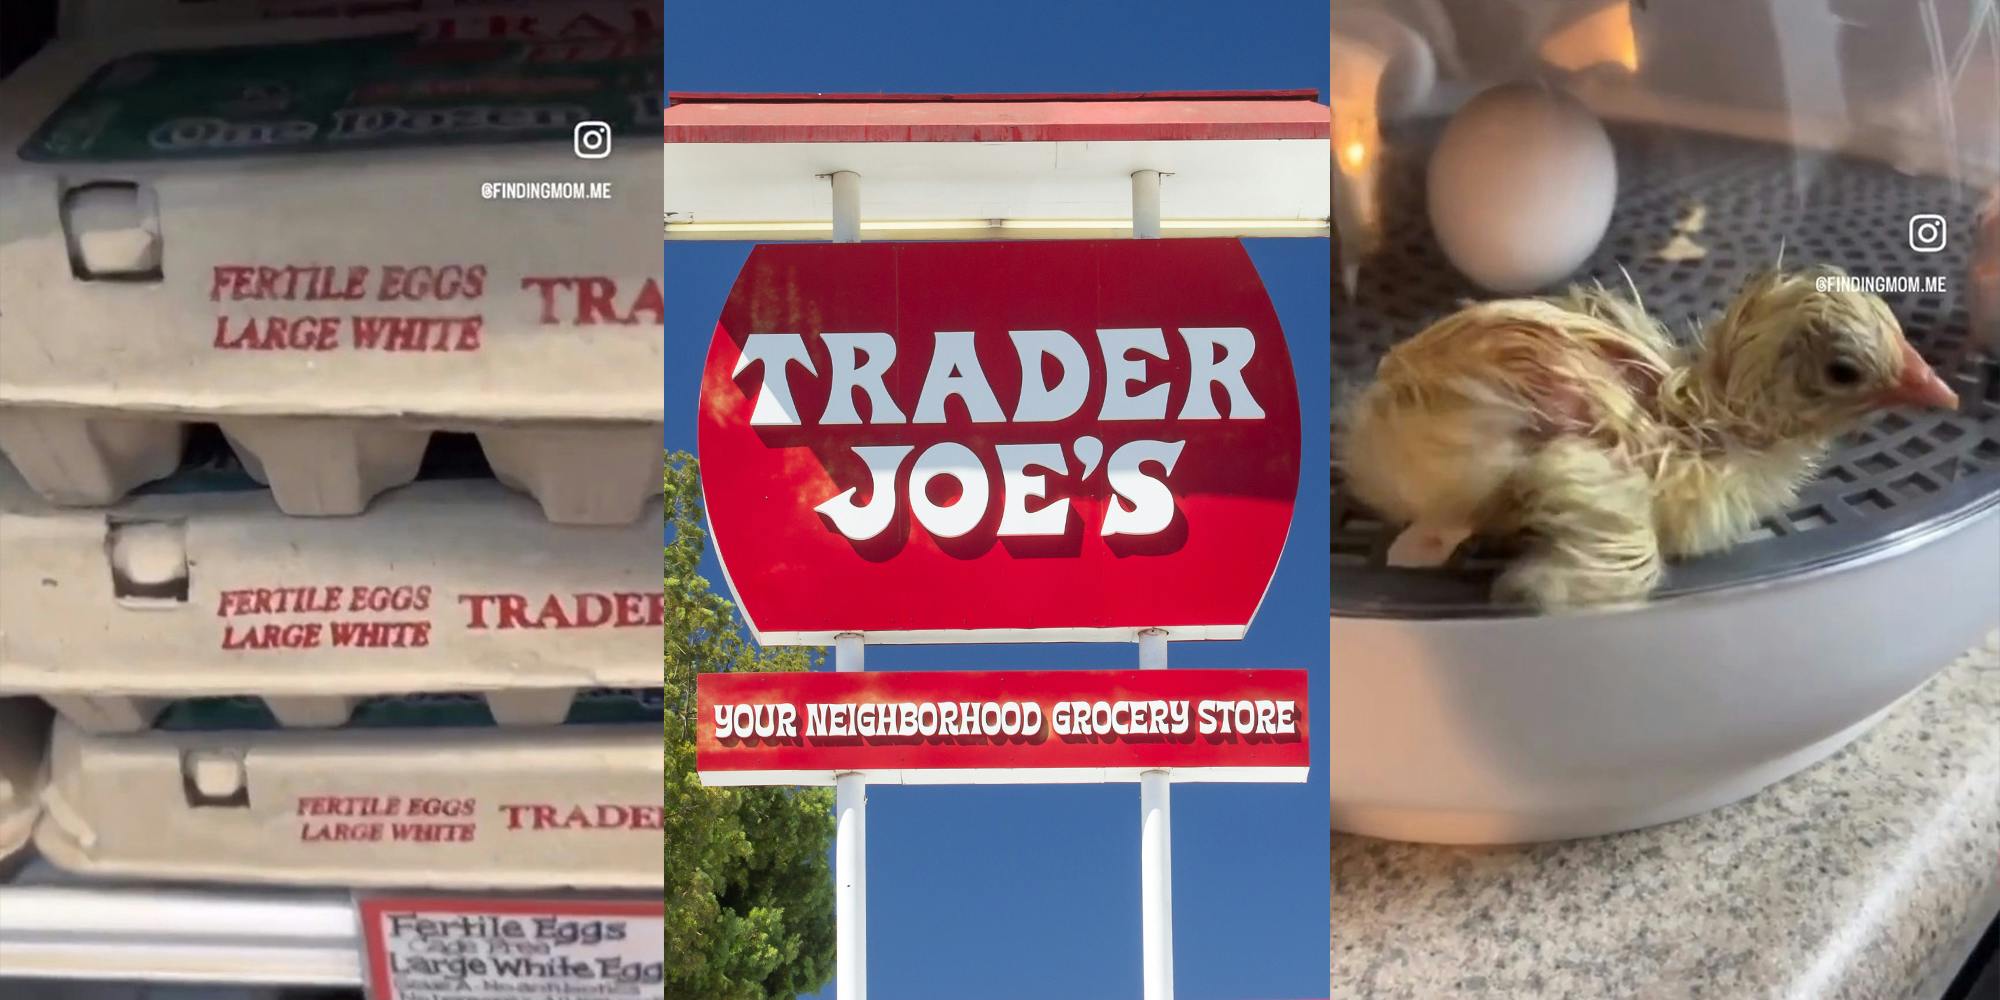 Customer Hatches Eggs From Trader Joe's